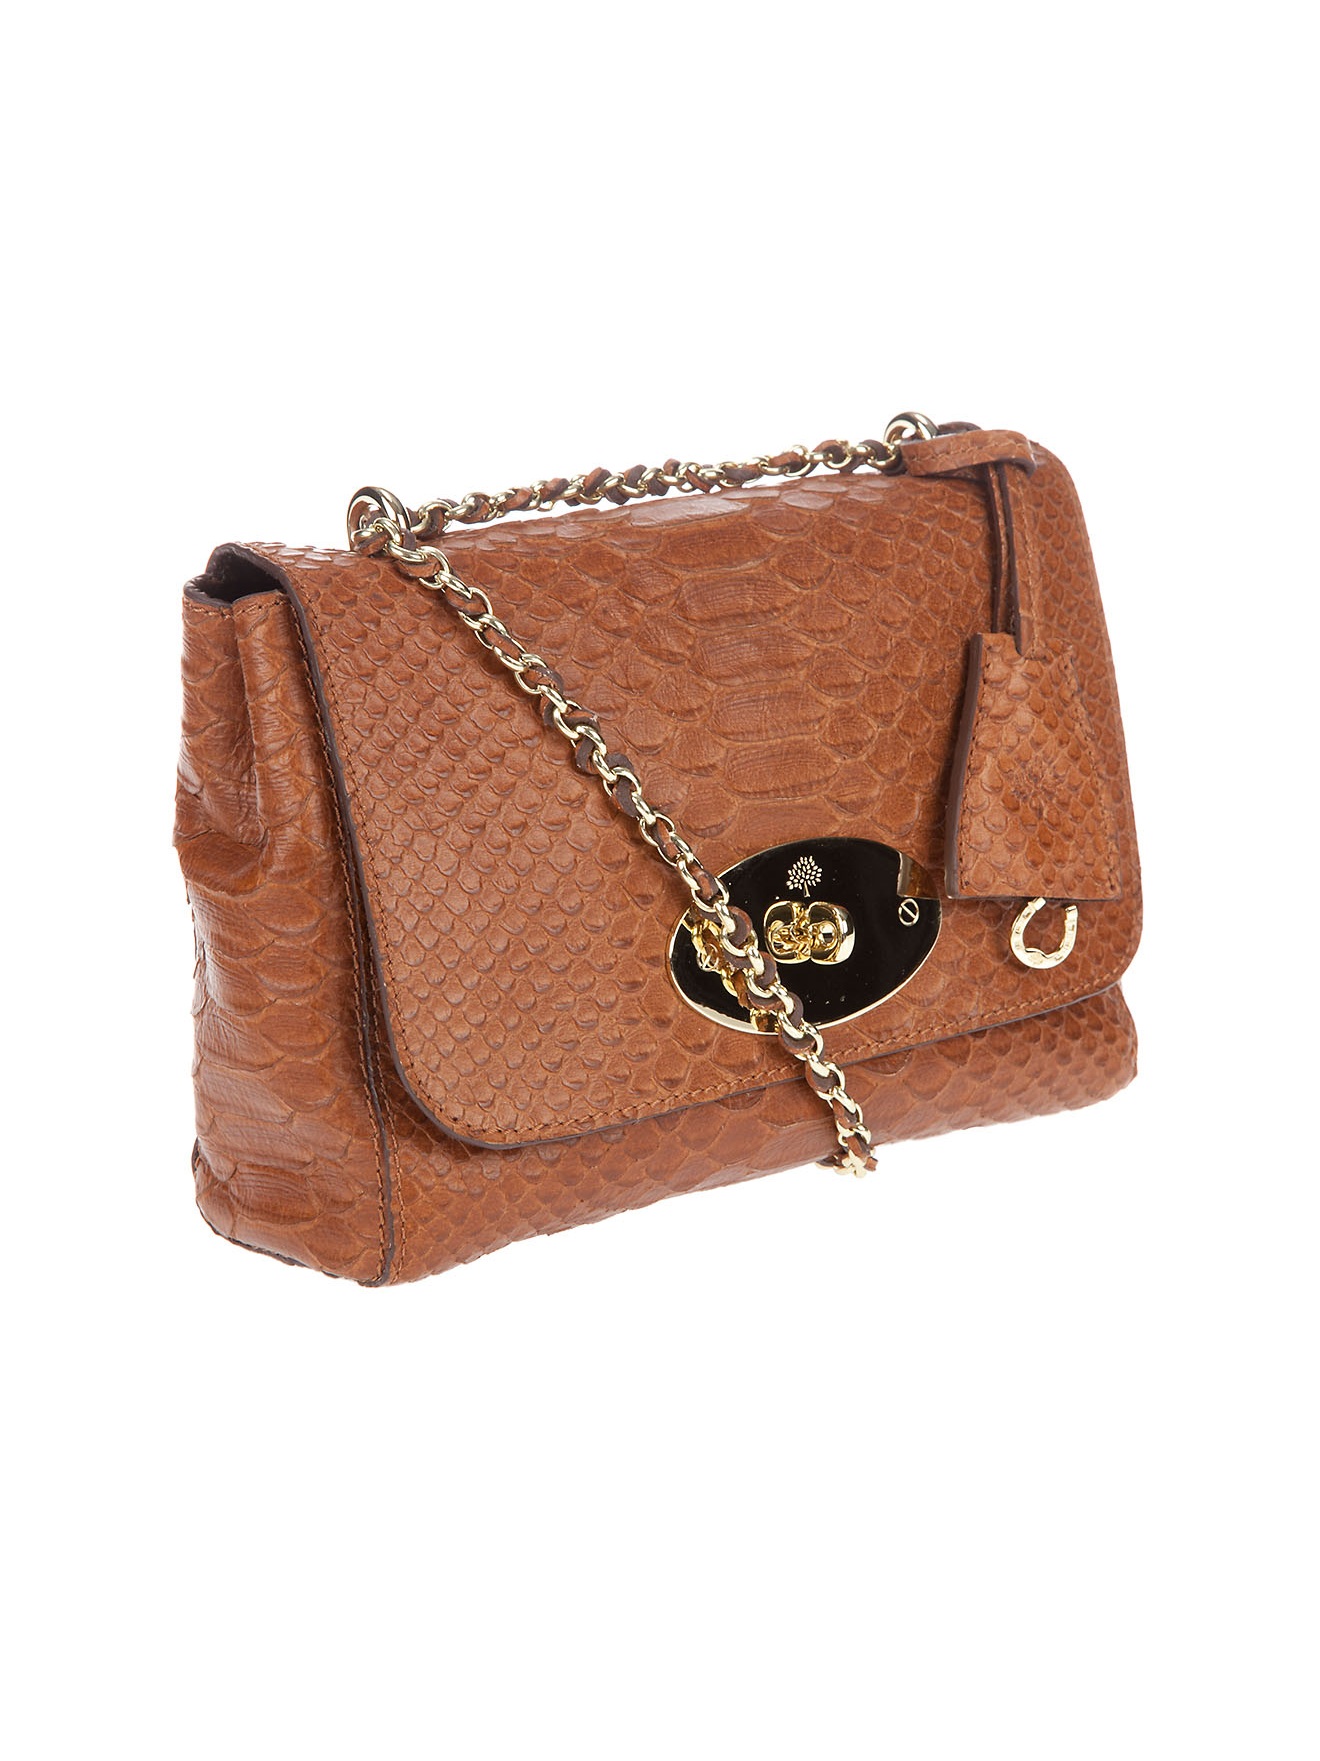  Mulberry  Lily Bag  in Oak Brown Lyst